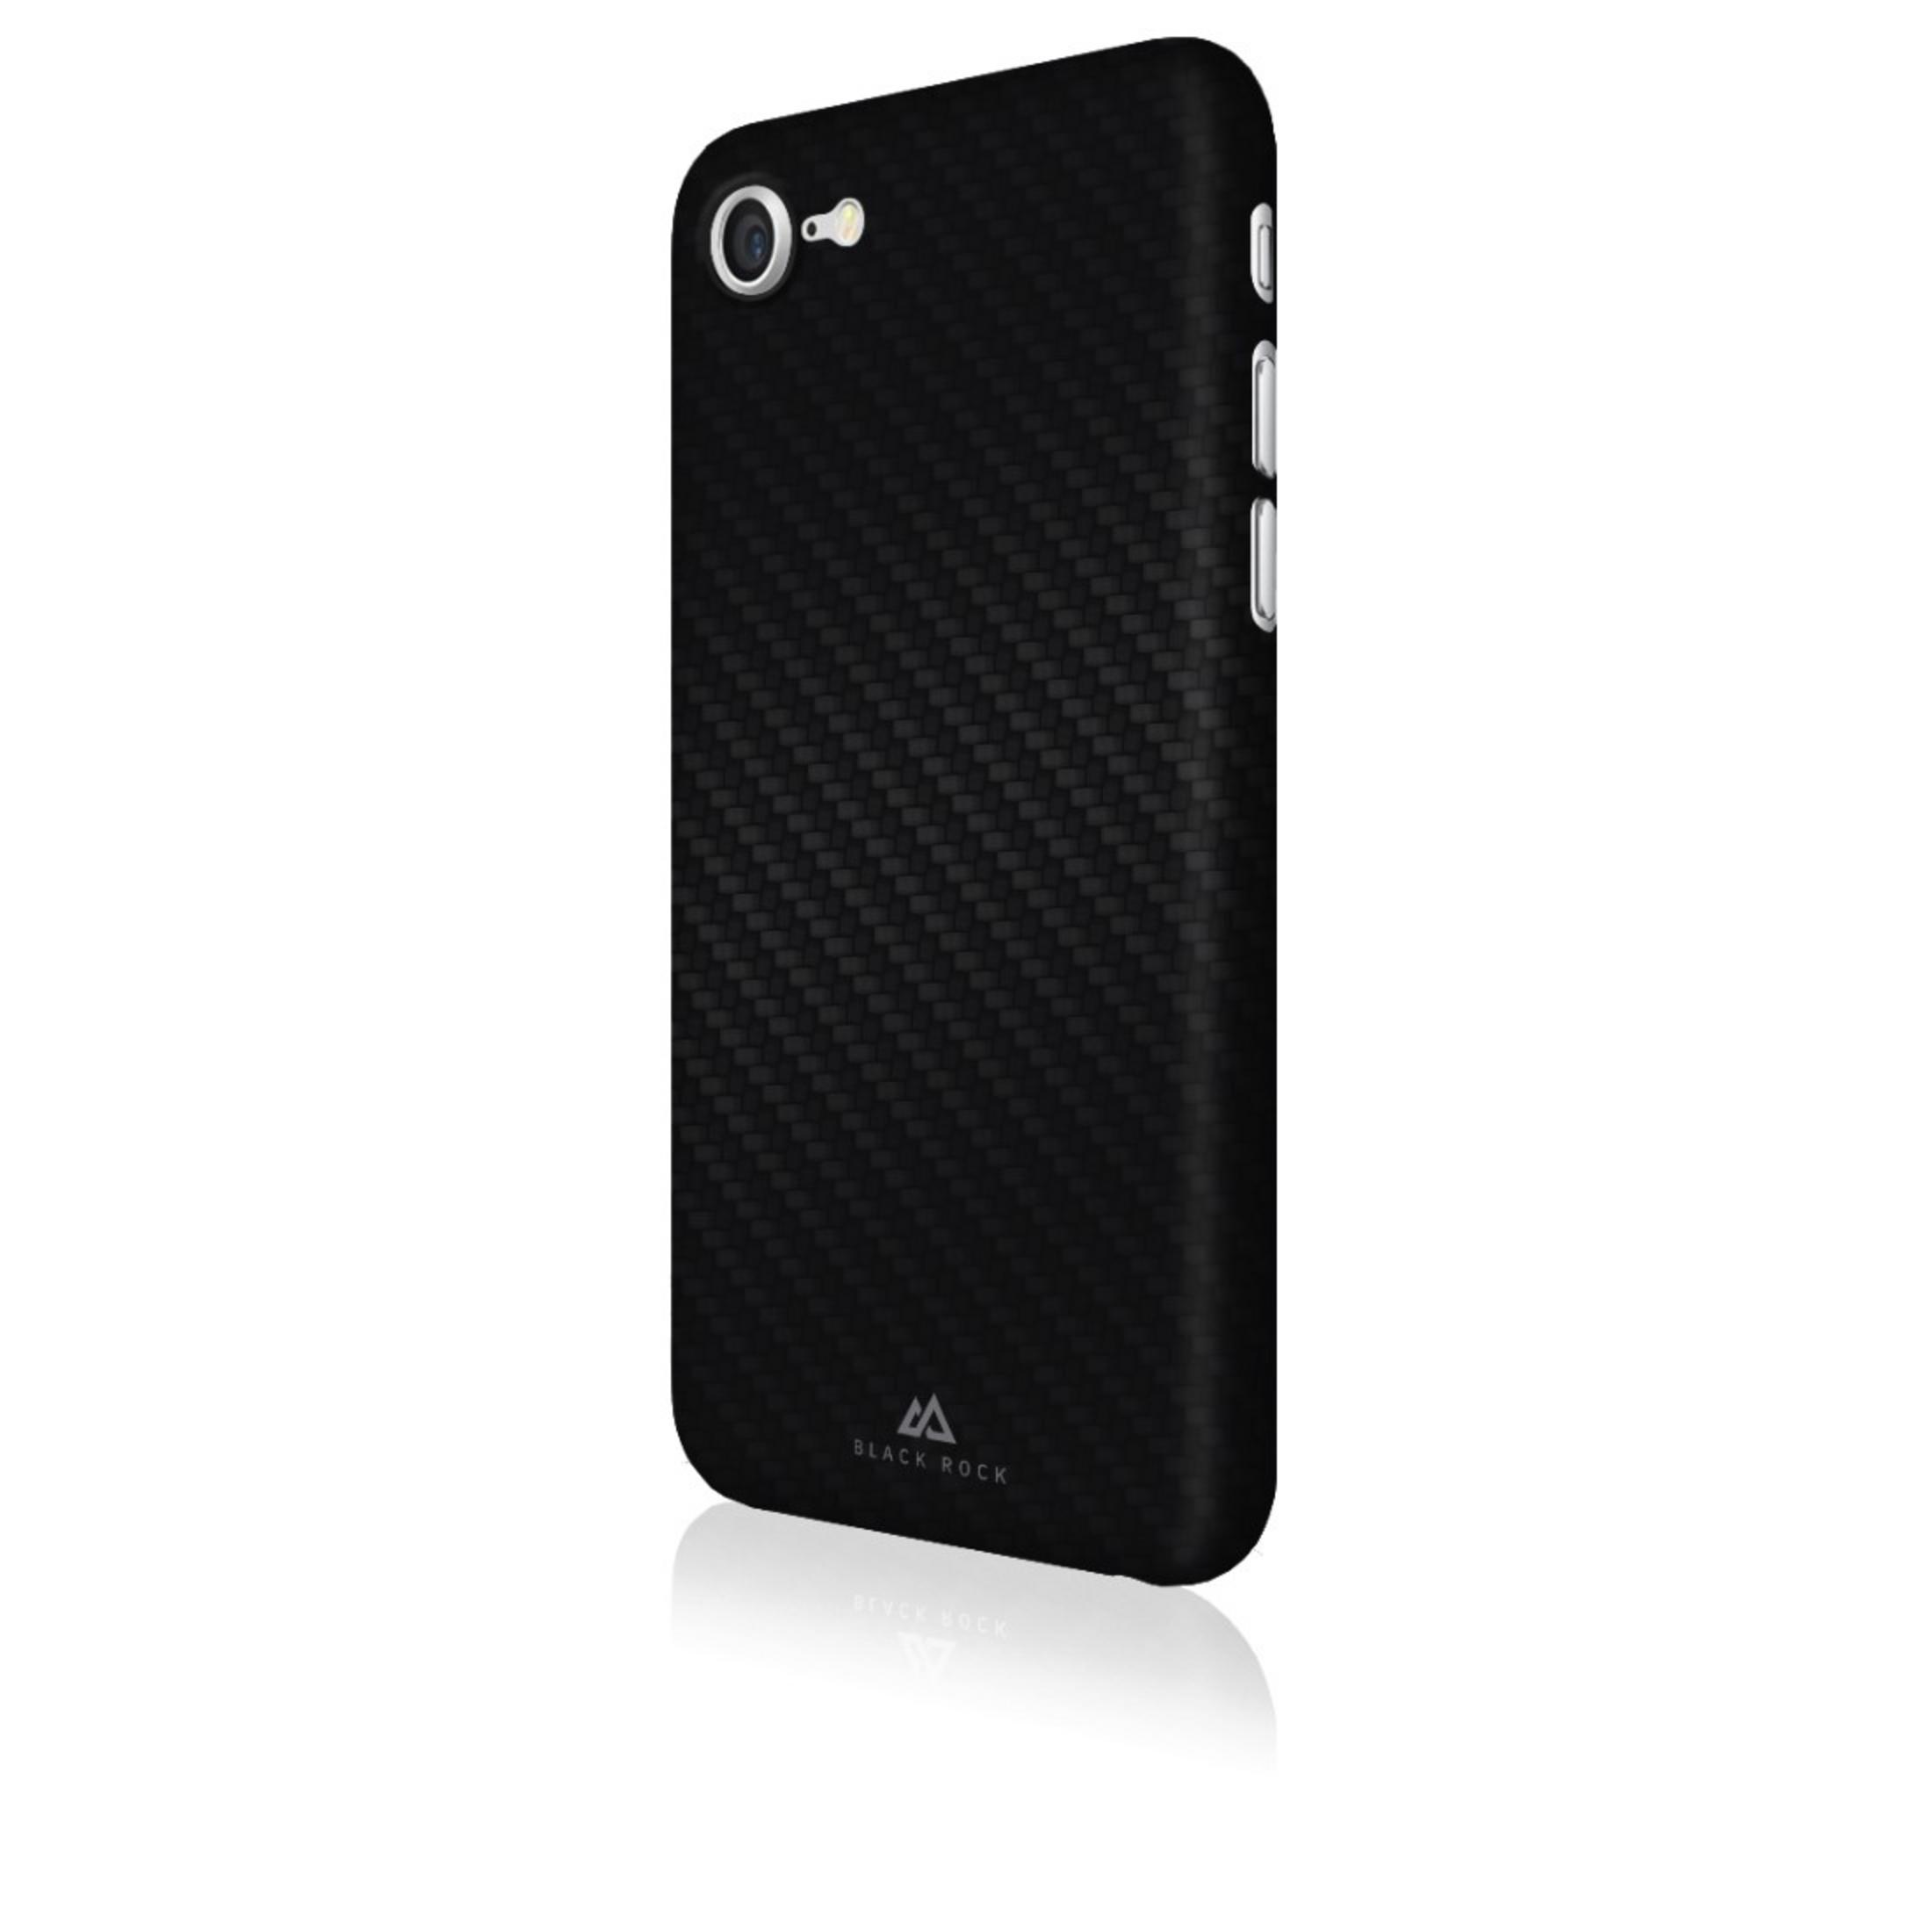 IPH.7/8 Apple, Backcover, 7, ULT.TH.ICED iPhone ROCK BLACK Carbon Flex 180525 CO SW/FC,